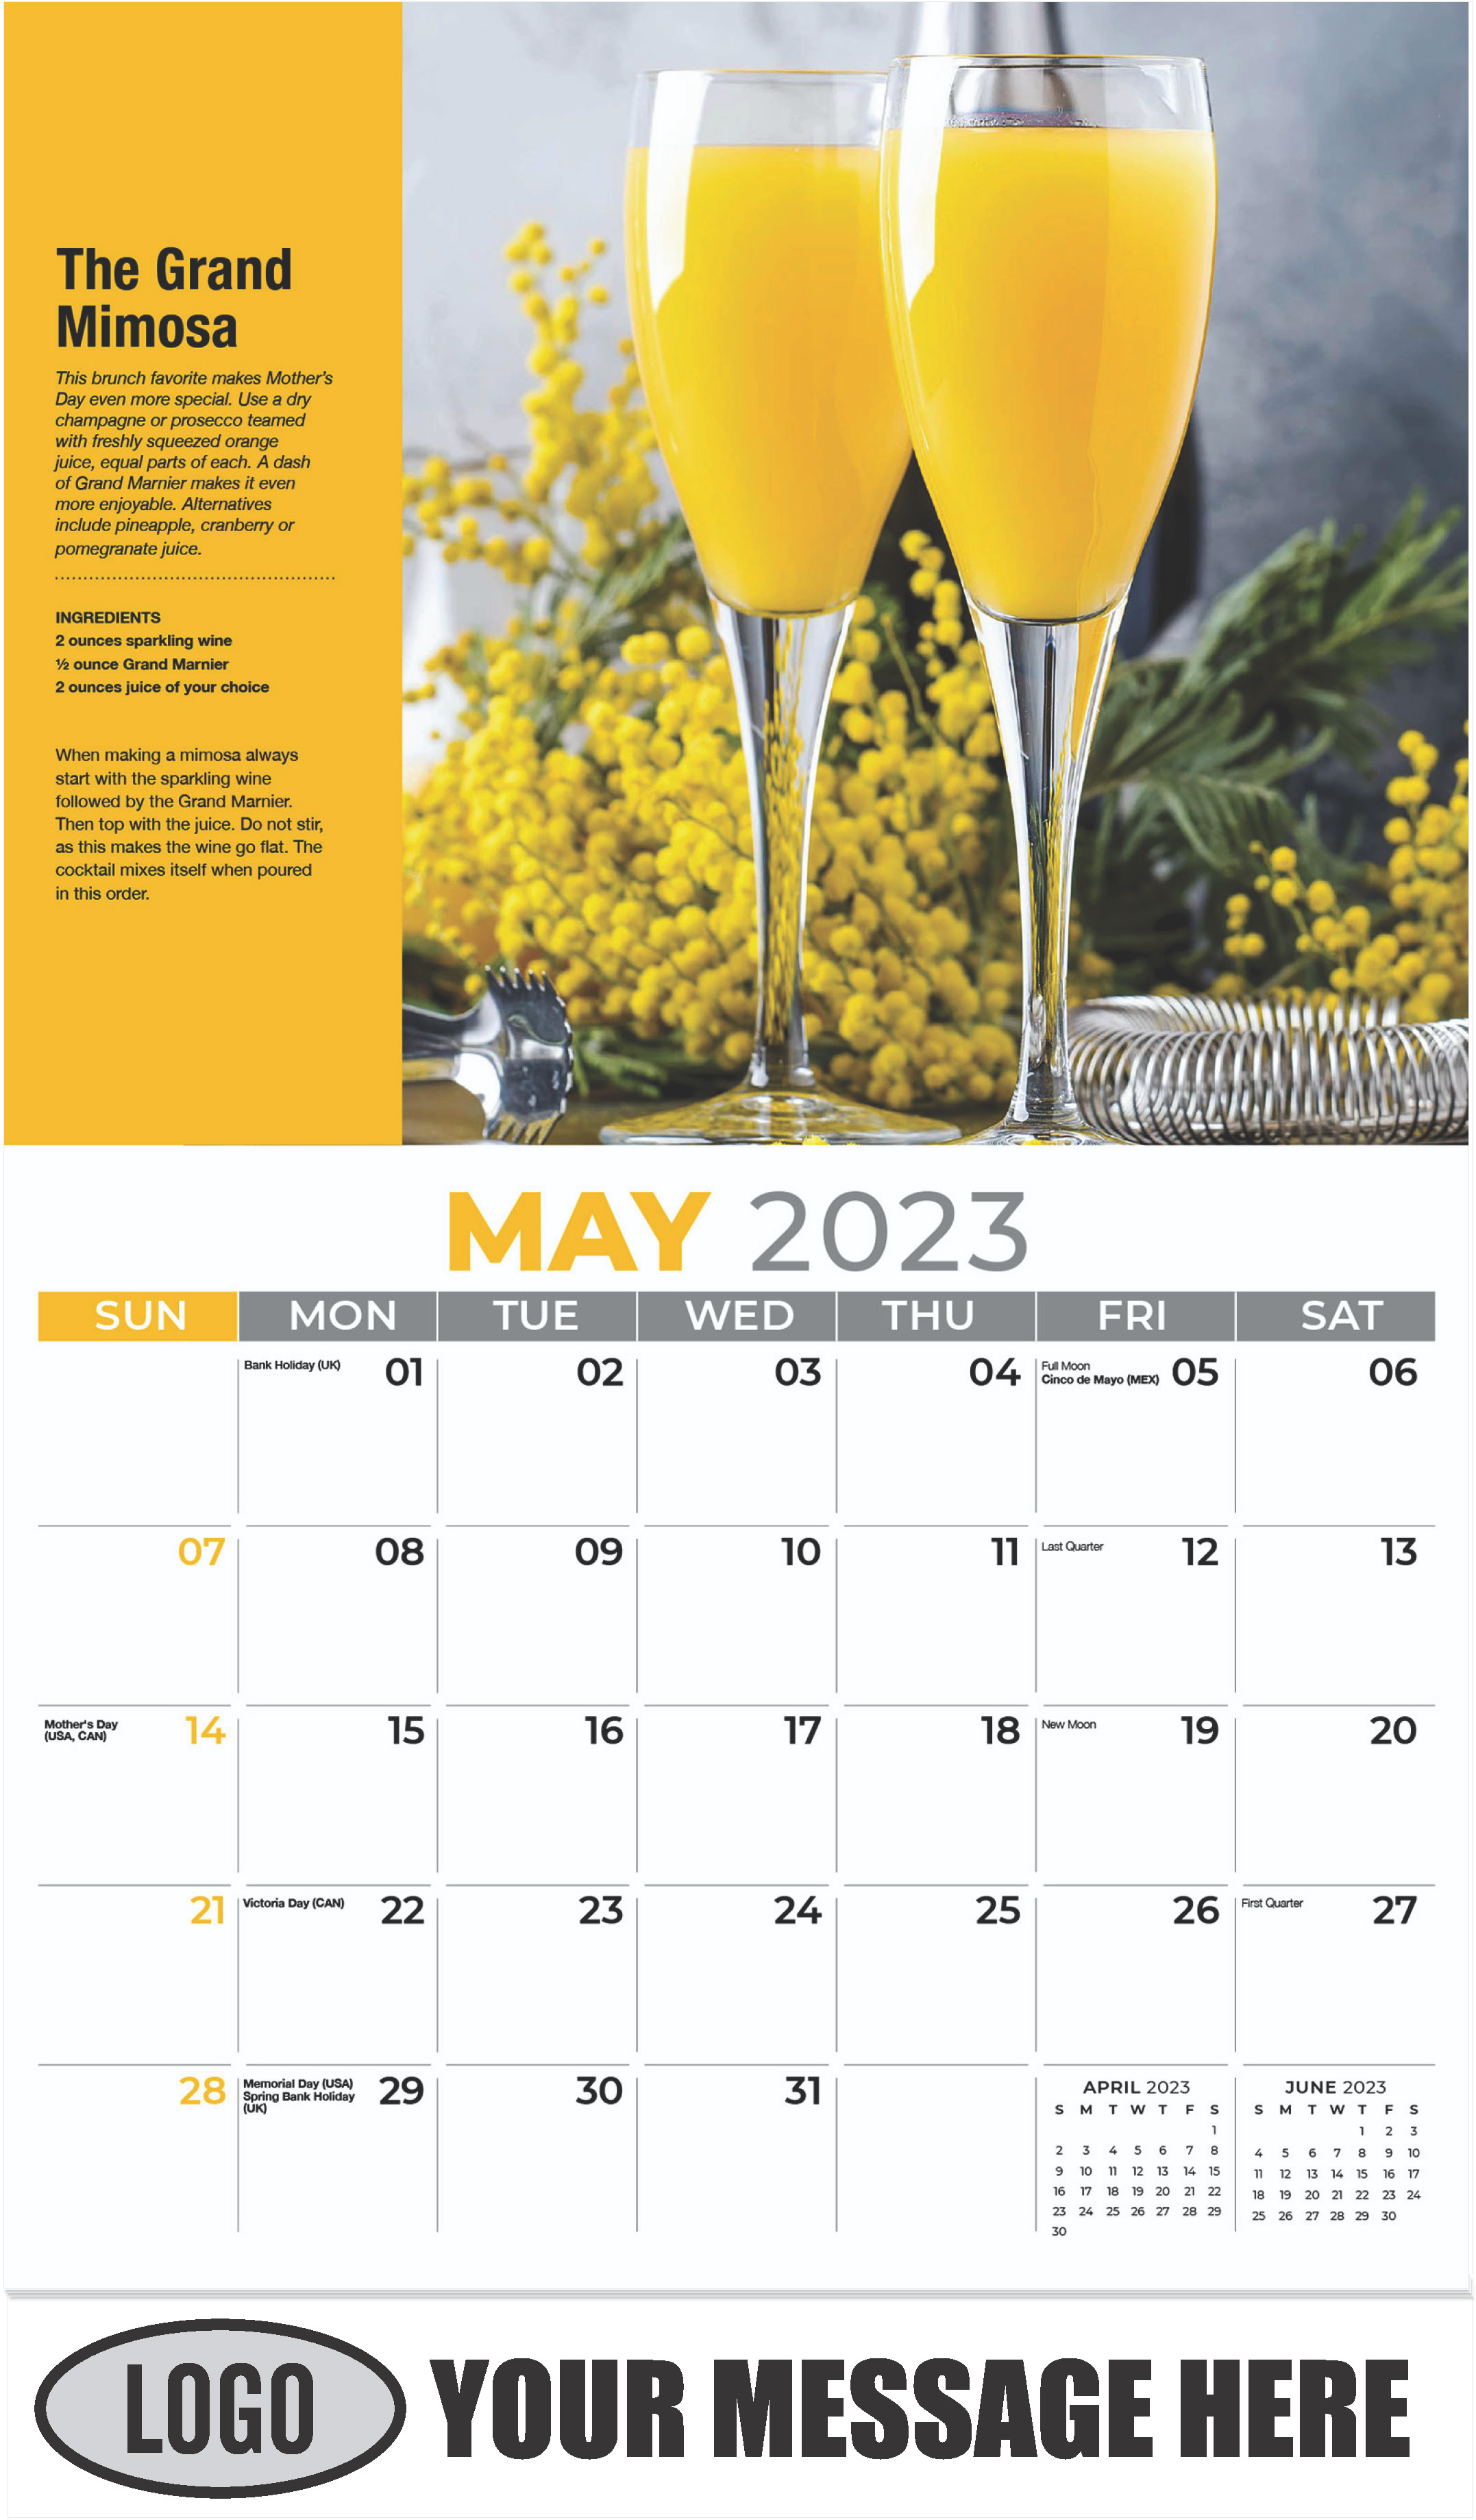 The Grand Mimosa - May - Happy Hour Cocktails 2023 Promotional Calendar